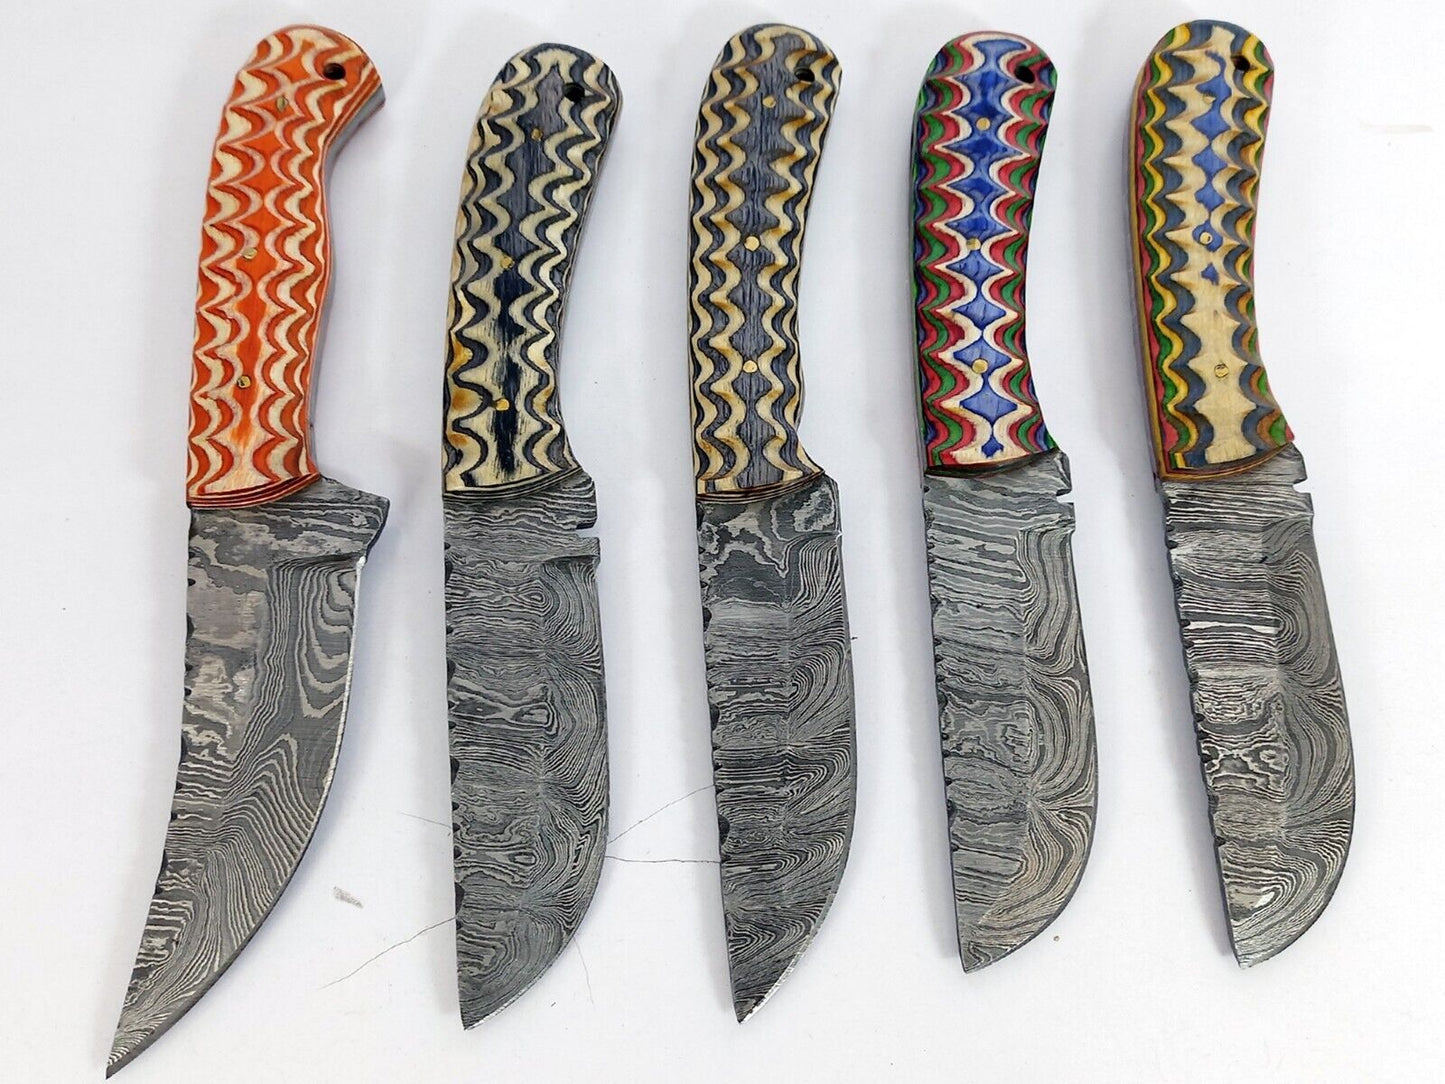 10 pieces Damascus steel Round scale skinning knives set with Leather sheath. Overall 85 inches long Damascus steel blade knives